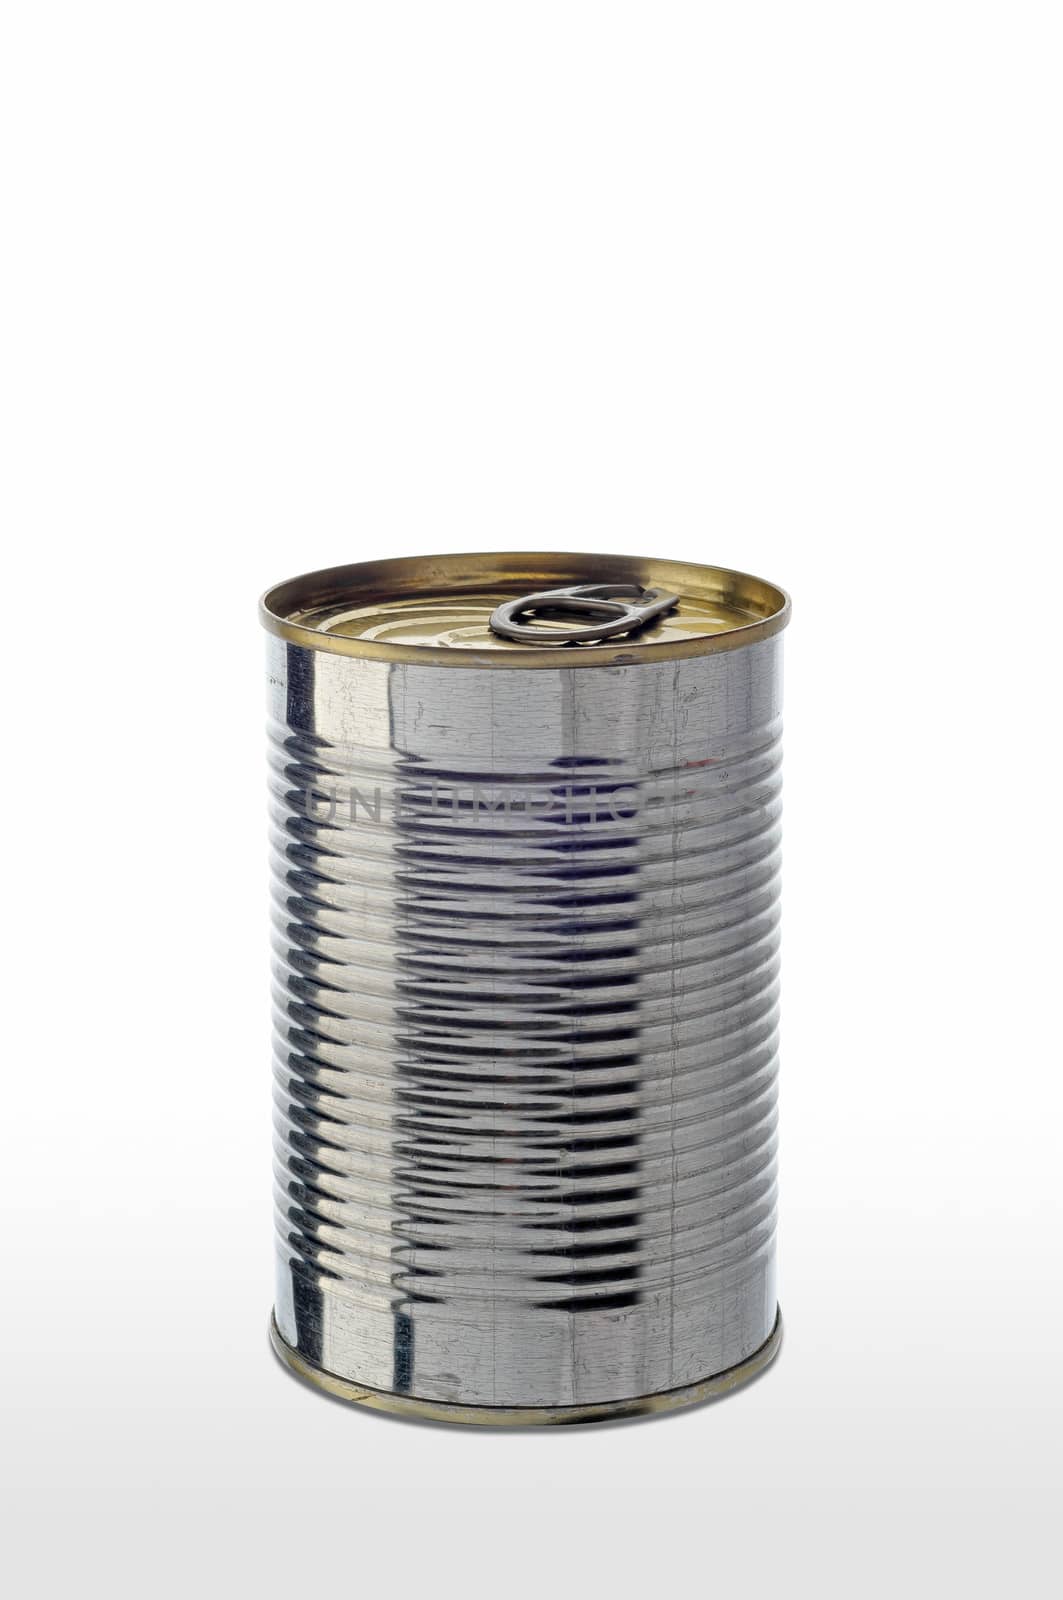 A simple tomato tin can on white background